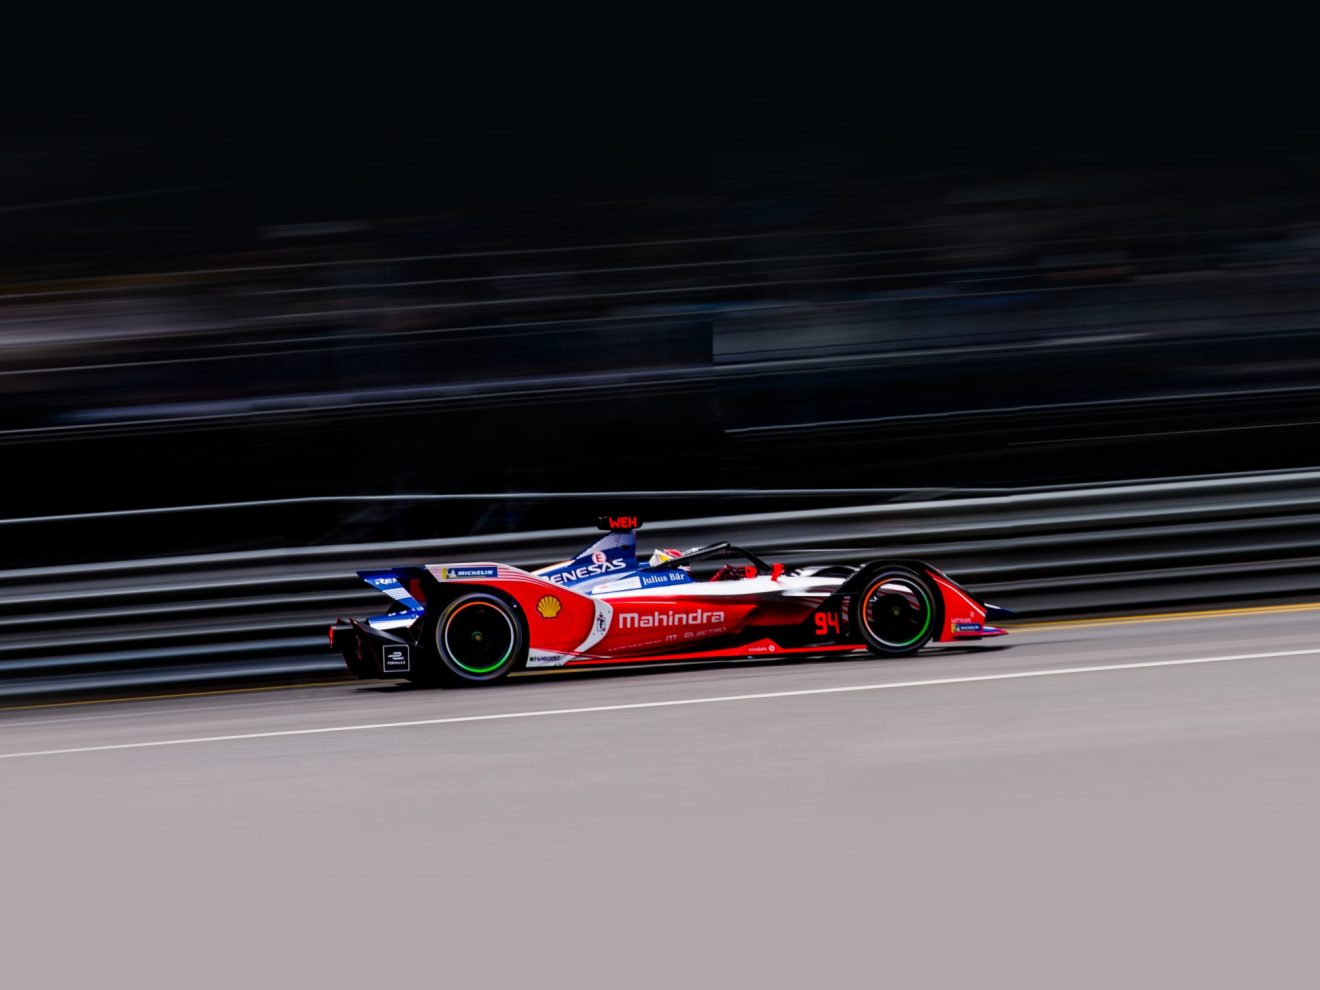 Points for Mahindra Racing’s Pascal Wehrlein at home E-Prix